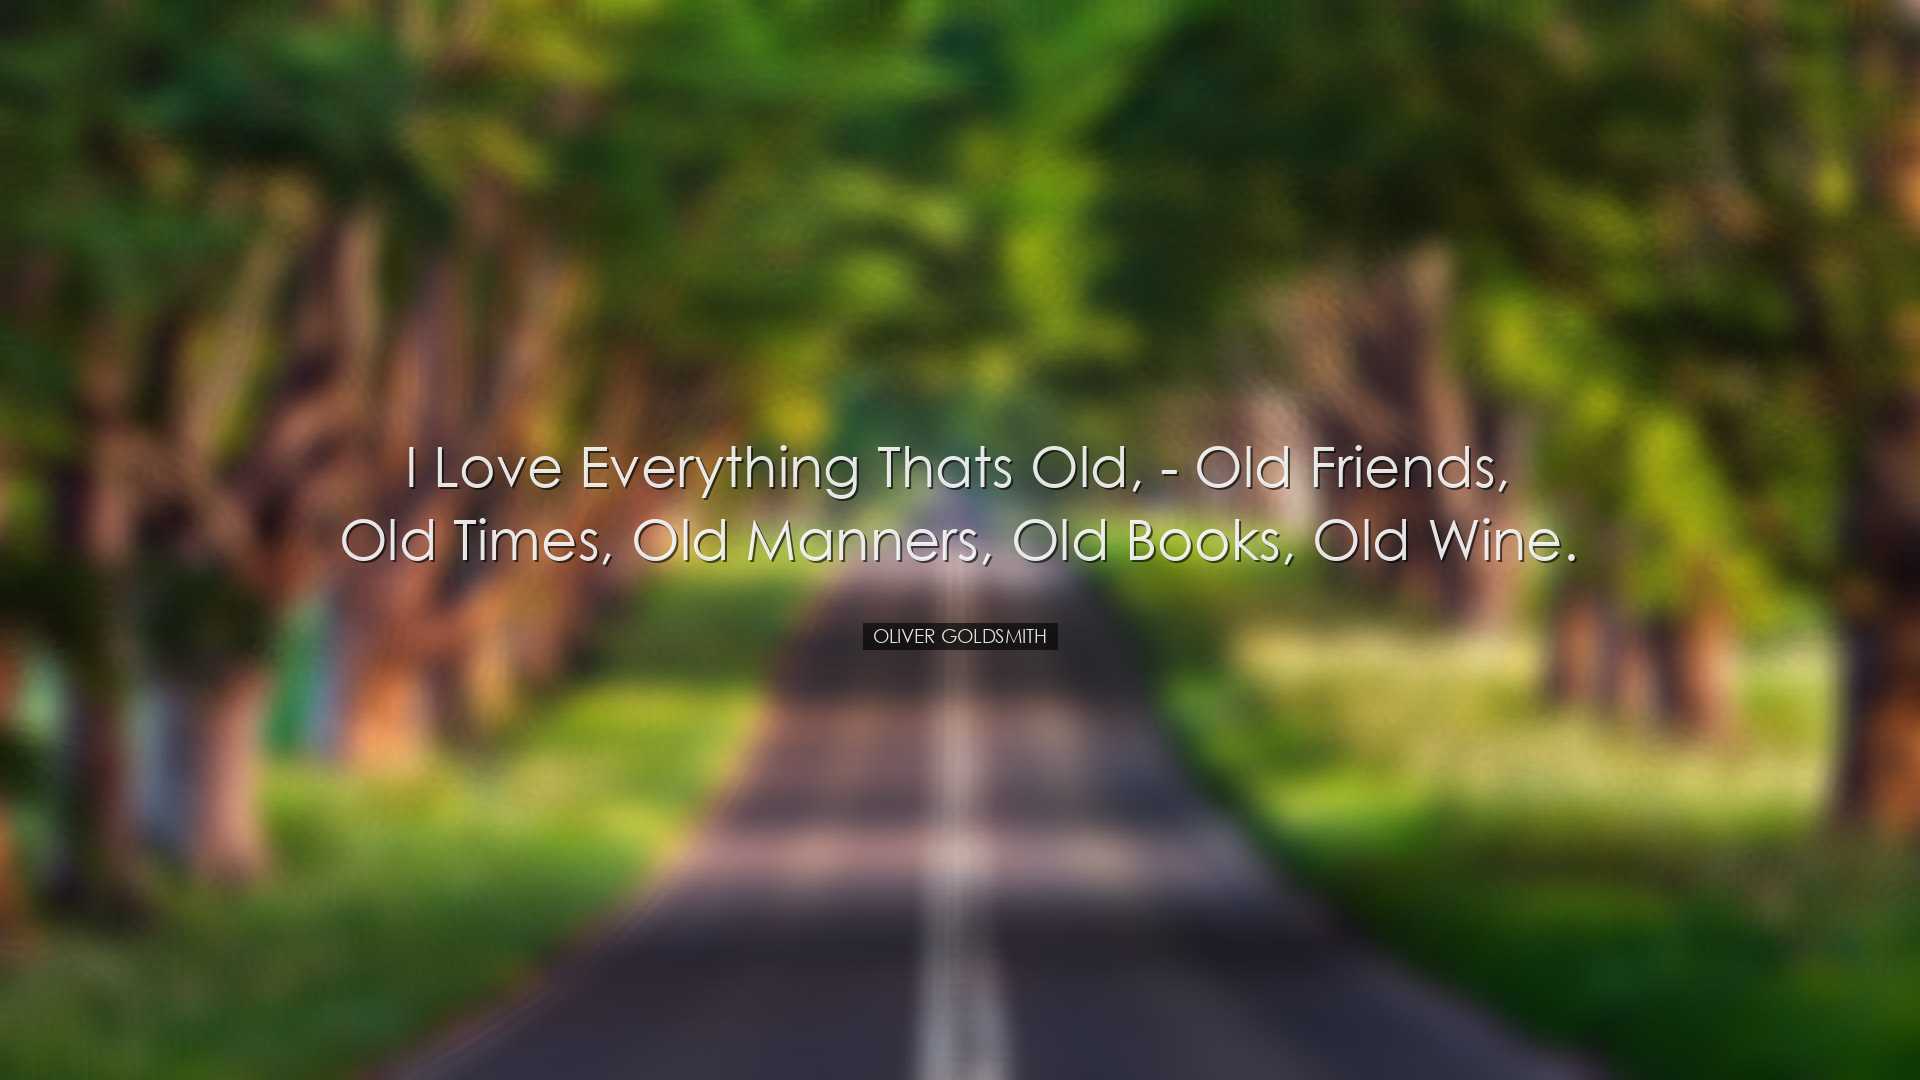 I love everything thats old, - old friends, old times, old manners